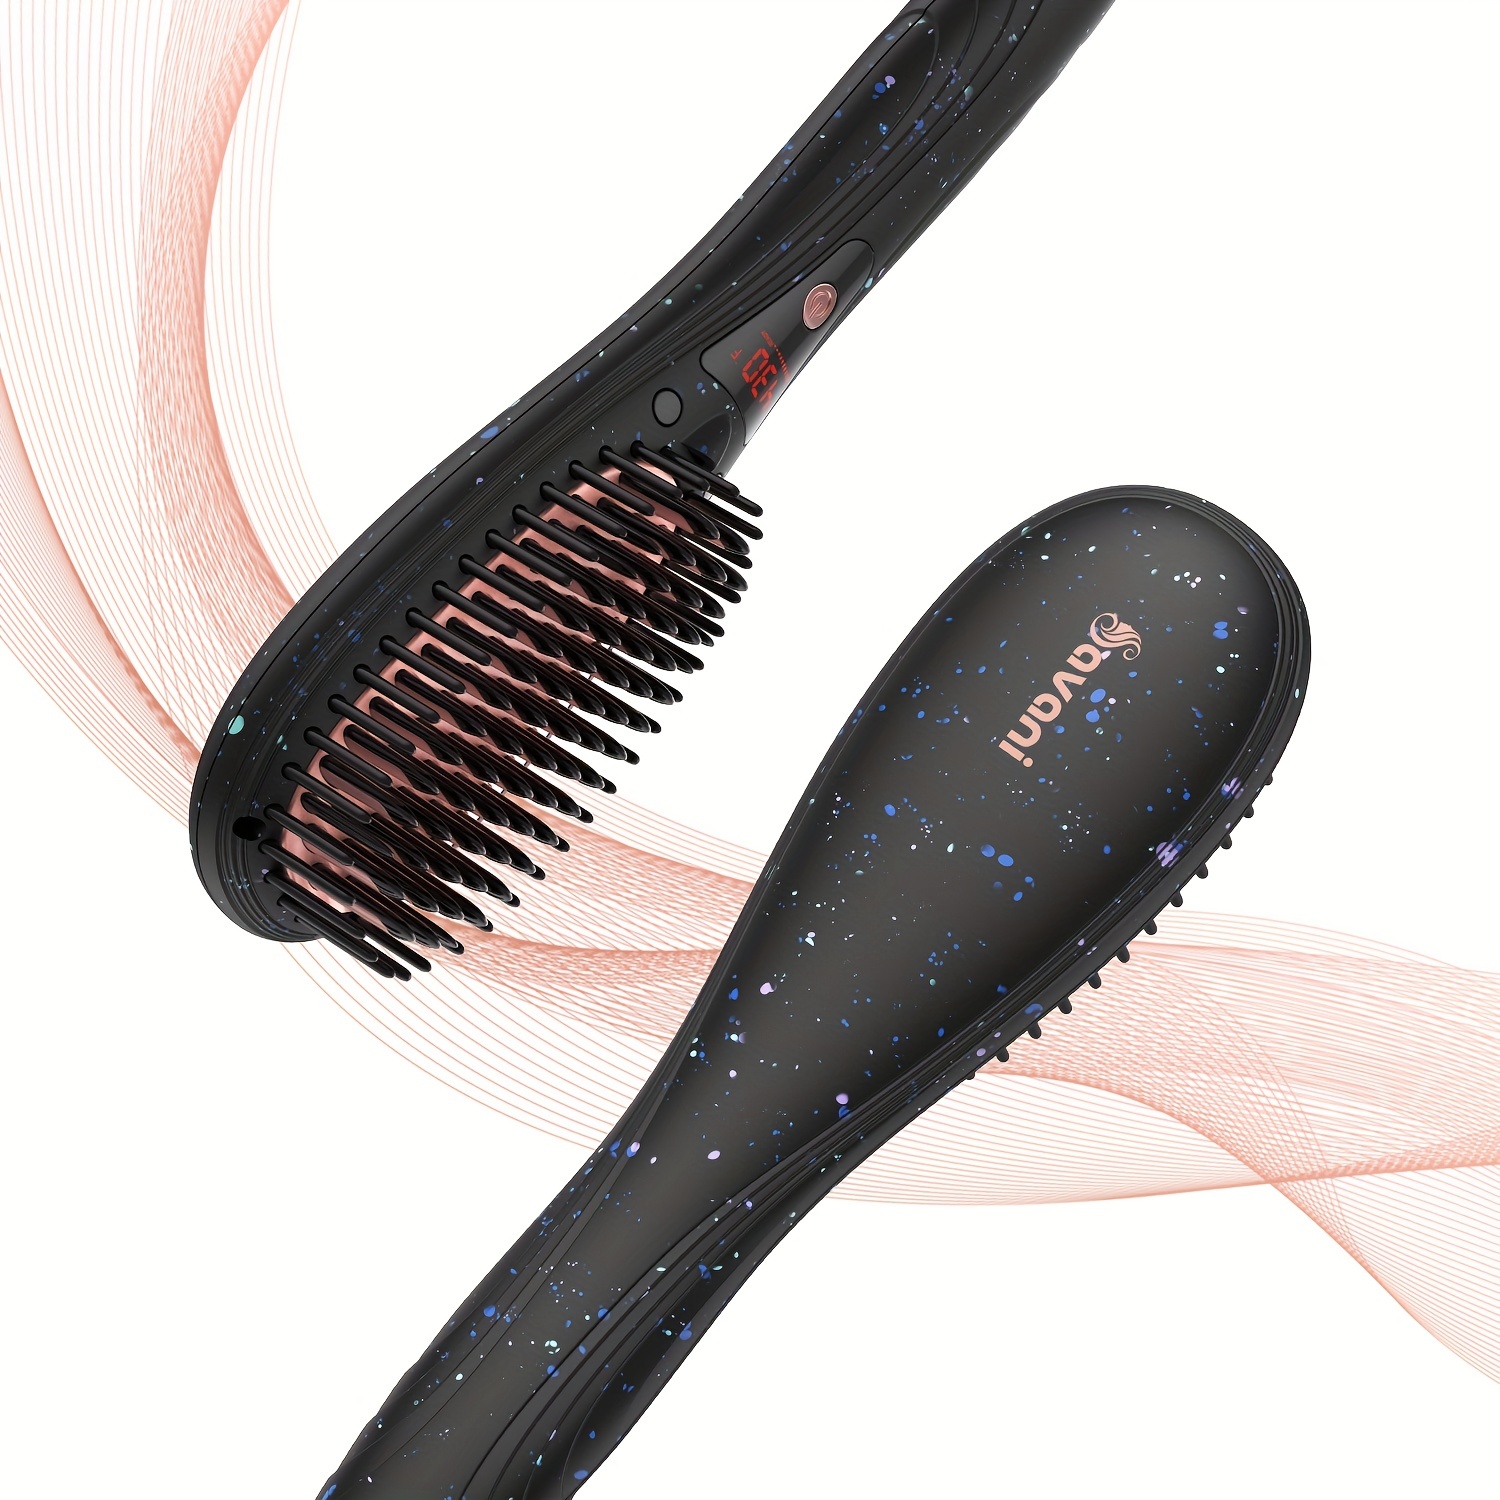 savani hair straightener brush fast heating ceramic negative ion hair straightening comb electric hot hair brush curly thick hair styling tool auto off anti scald multiple temp settings details 2